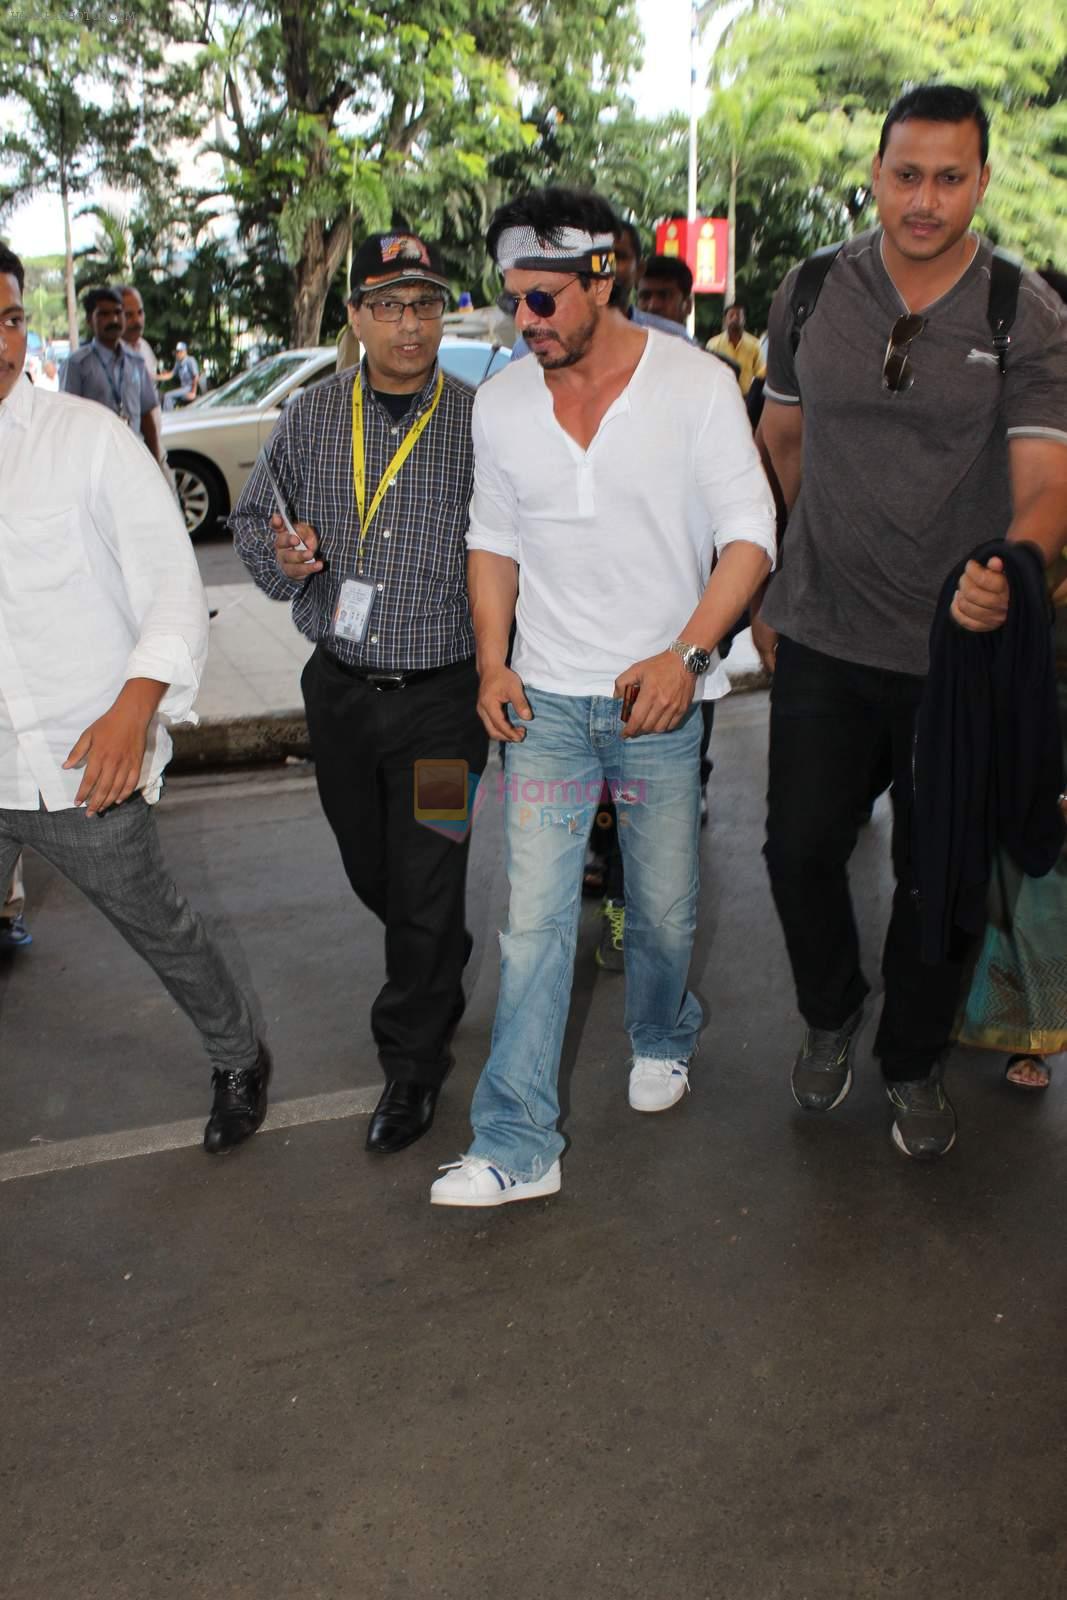 Shahrukh Khan snapped at  Airport for Dilwale shoot in Hyderabad on 14th Sept 2015